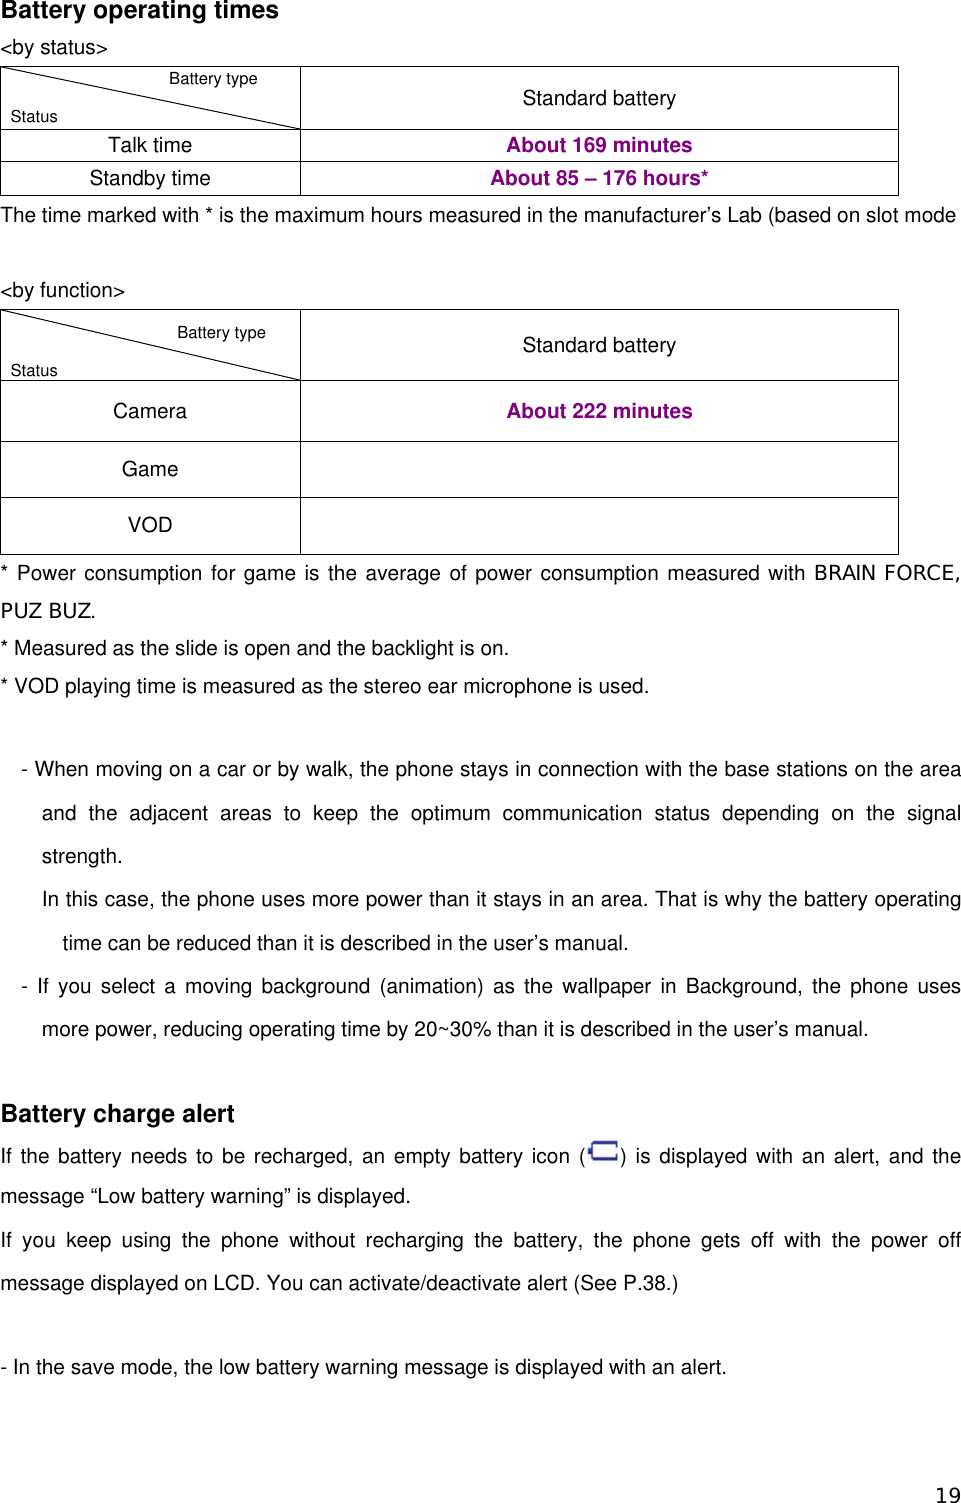 Battery operating times &lt;by status&gt;                    Battery type  Status  Standard battery Talk time  About 169 minutes Standby time  About 85 – 176 hours* The time marked with * is the maximum hours measured in the manufacturer’s Lab (based on slot mode    &lt;by function&gt; Battery type  Status  Standard battery Camera  About 222 minutes Game  VOD  * Power consumption for game is the average of power consumption measured with BRAIN FORCE, PUZ BUZ. * Measured as the slide is open and the backlight is on.   * VOD playing time is measured as the stereo ear microphone is used.      - When moving on a car or by walk, the phone stays in connection with the base stations on the area and the adjacent areas to keep the optimum communication status depending on the signal strength.         In this case, the phone uses more power than it stays in an area. That is why the battery operating time can be reduced than it is described in the user’s manual.   - If you select a moving background (animation) as the wallpaper in Background, the phone uses more power, reducing operating time by 20~30% than it is described in the user’s manual.    Battery charge alert If the battery needs to be recharged, an empty battery icon ( ) is displayed with an alert, and the message “Low battery warning” is displayed.   If you keep using the phone without recharging the battery, the phone gets off with the power off message displayed on LCD. You can activate/deactivate alert (See P.38.)  - In the save mode, the low battery warning message is displayed with an alert.   19